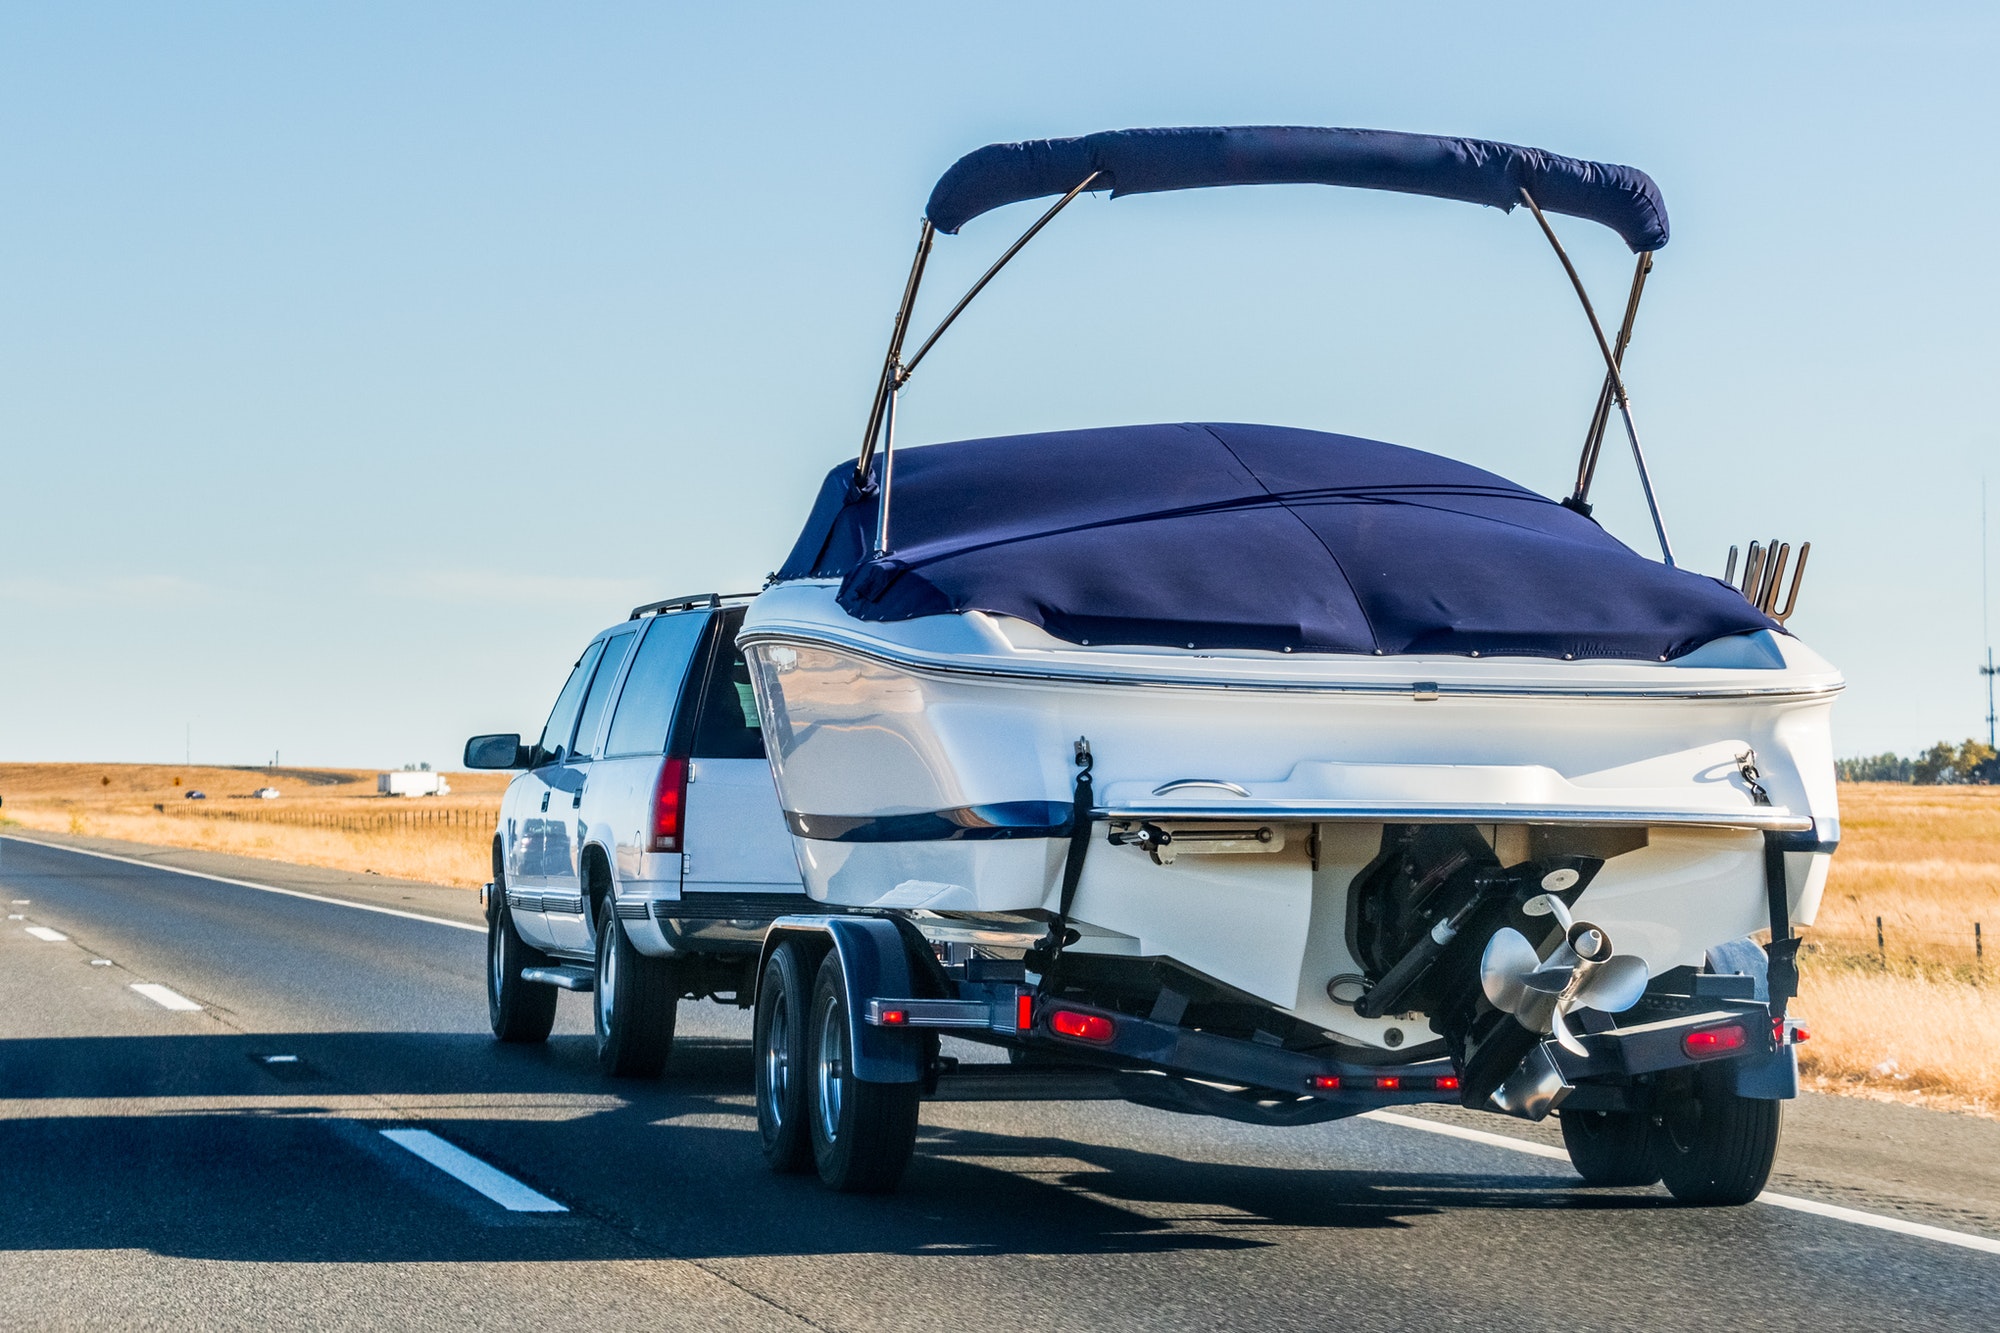 Truck towing a boat on the interstate, California